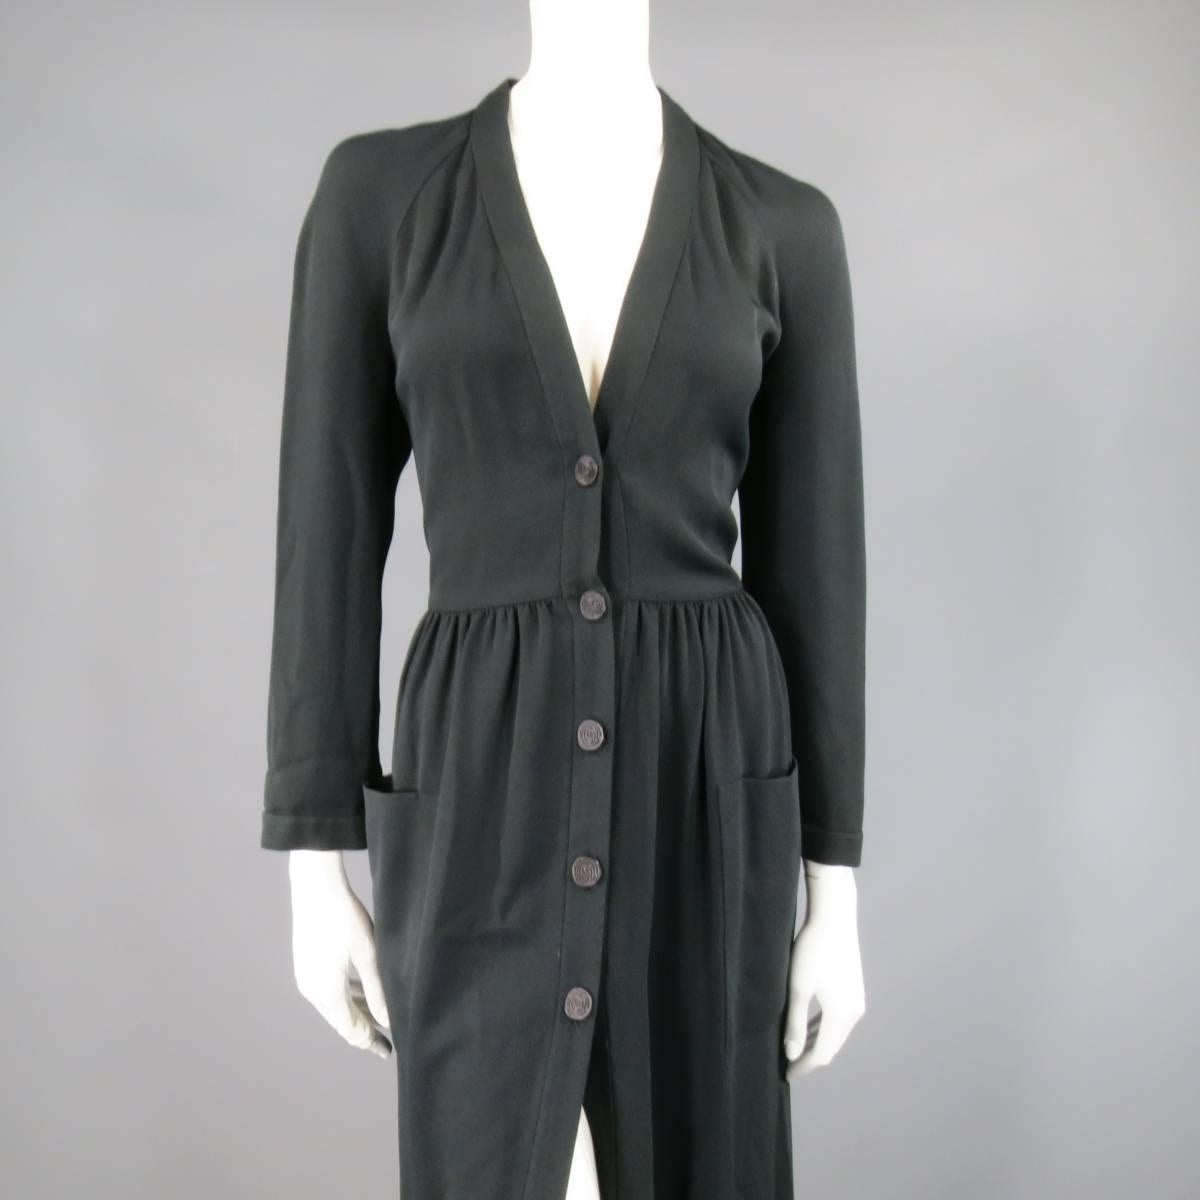 This fabulous vintage CHLOE dress comes in a black textured material and features a deep V neck, button up front with engraved buttons, raglan sleeves, gathered waist A line ankle length skirt, and double patch pockets. Evenly faded a couple shades